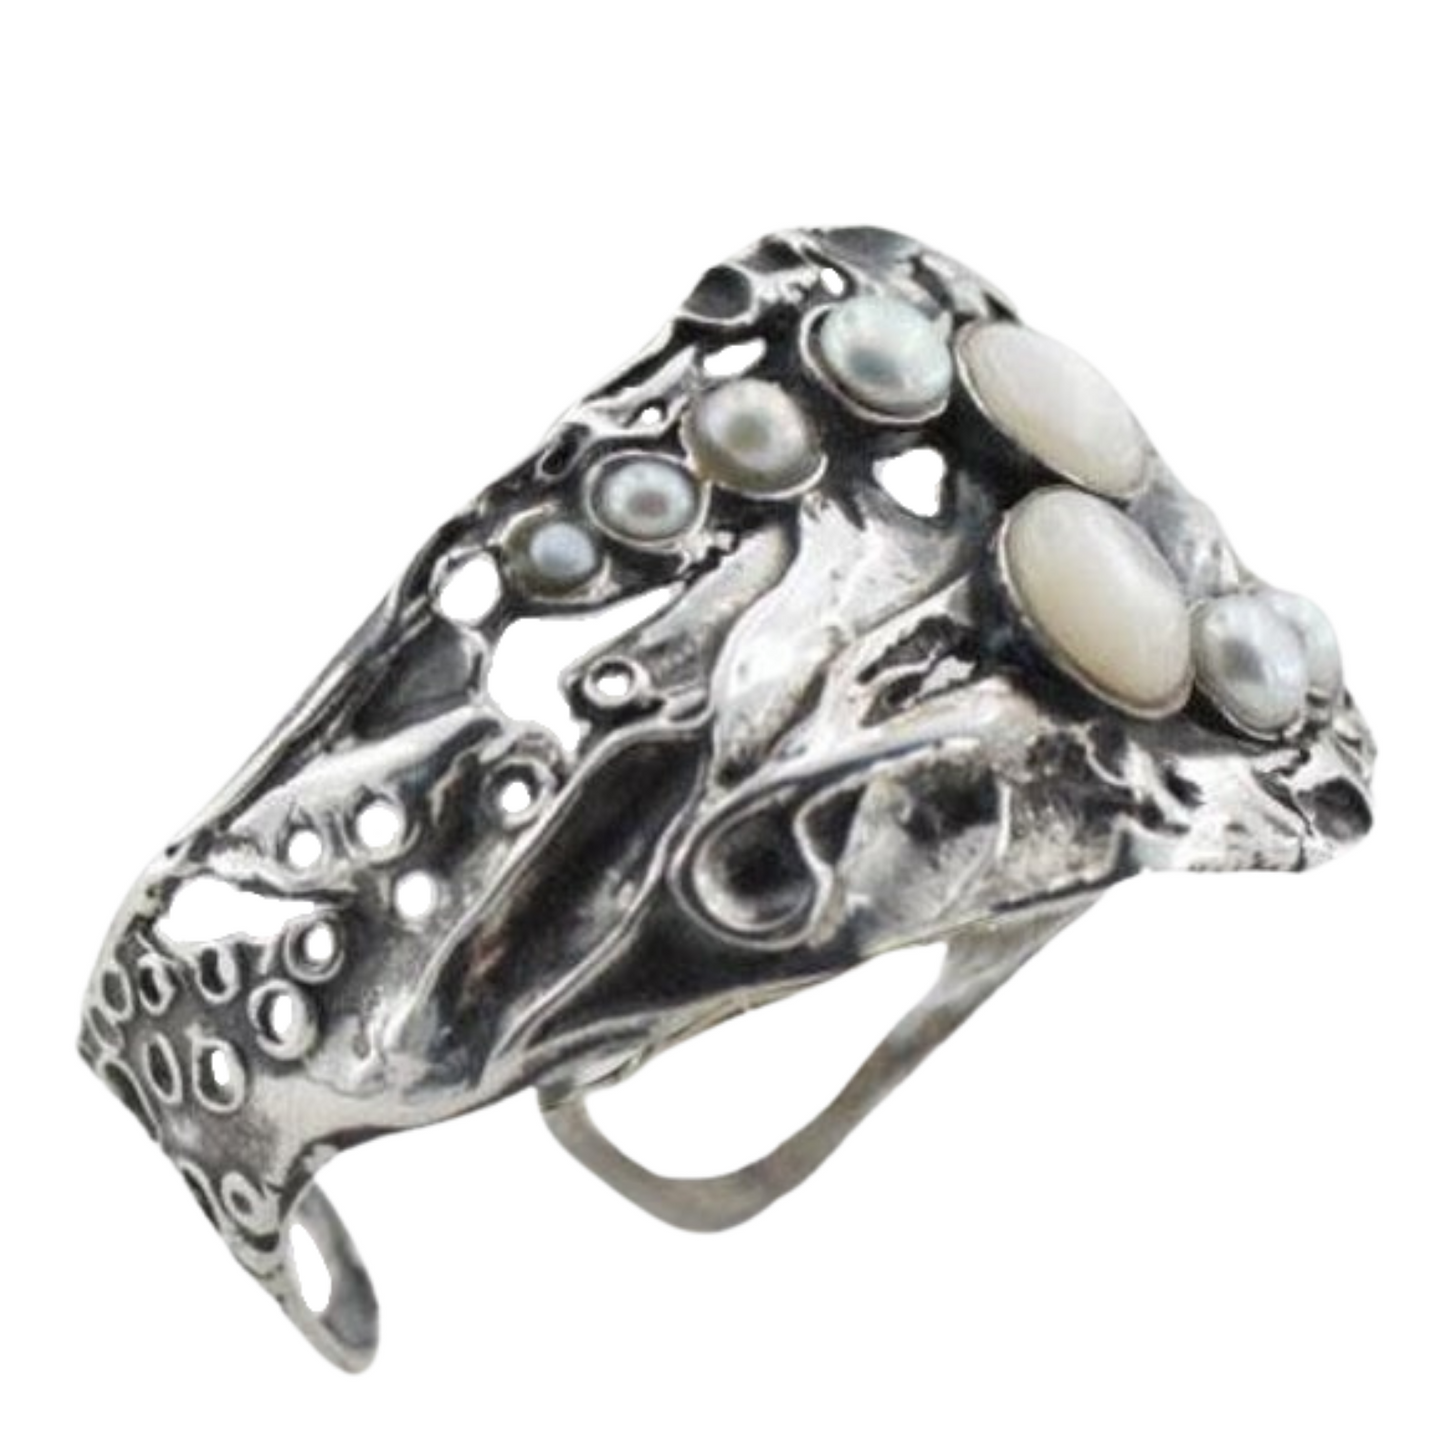 Duerry's Handmade fine silver Cuff Bracelet with Opalit and pearls, statement jewelry, artistic fine jewelry bracelet